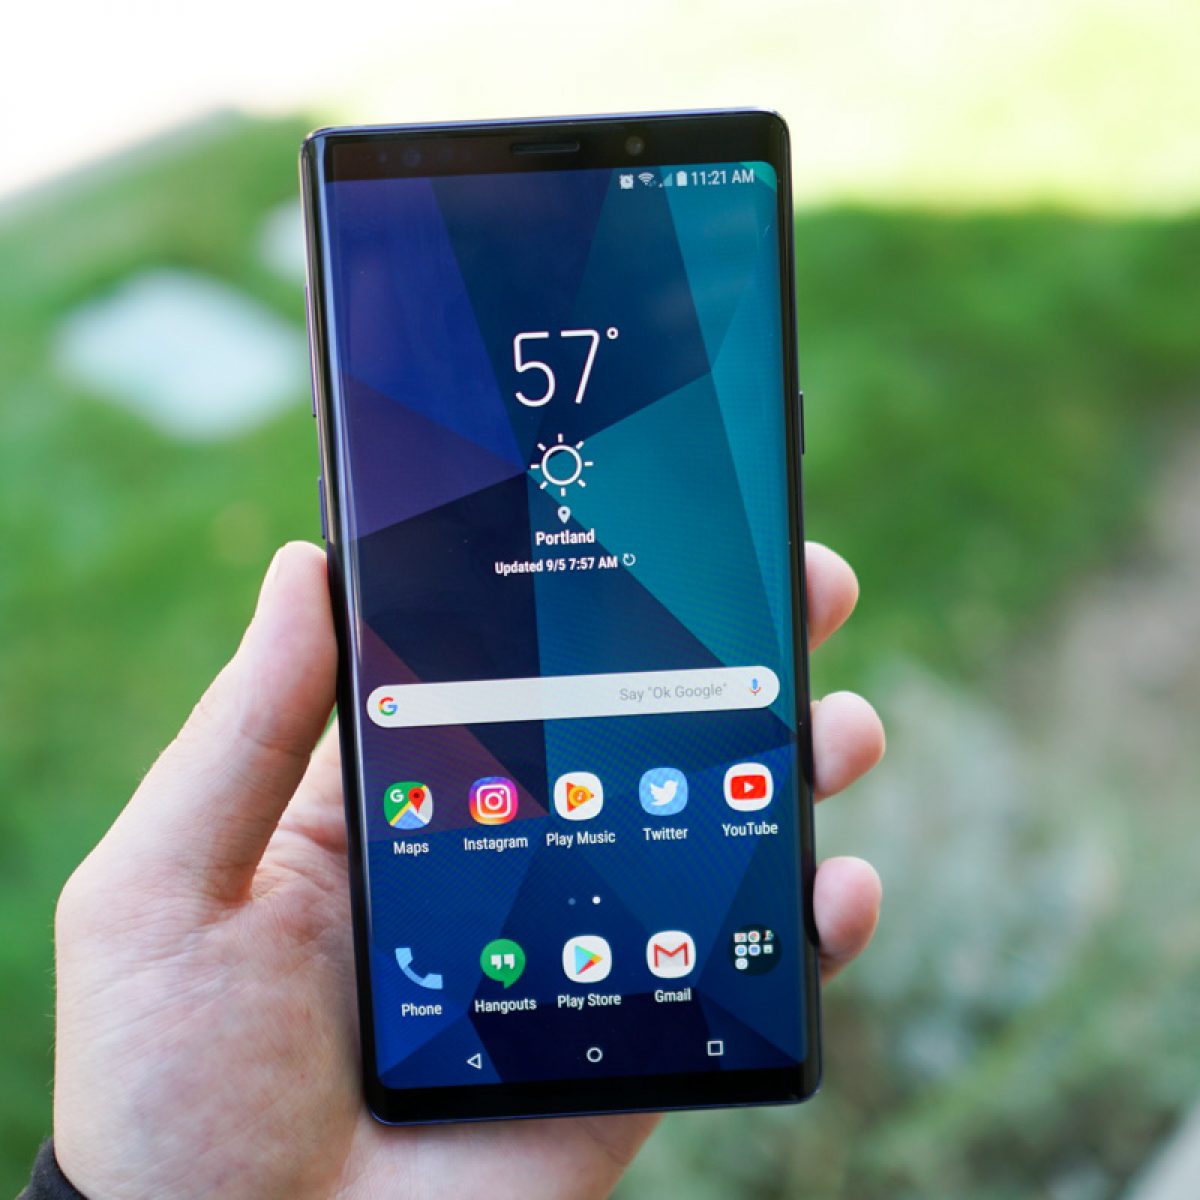 Samsung Galaxy Note10+ 5G Earns First Place Distinction in